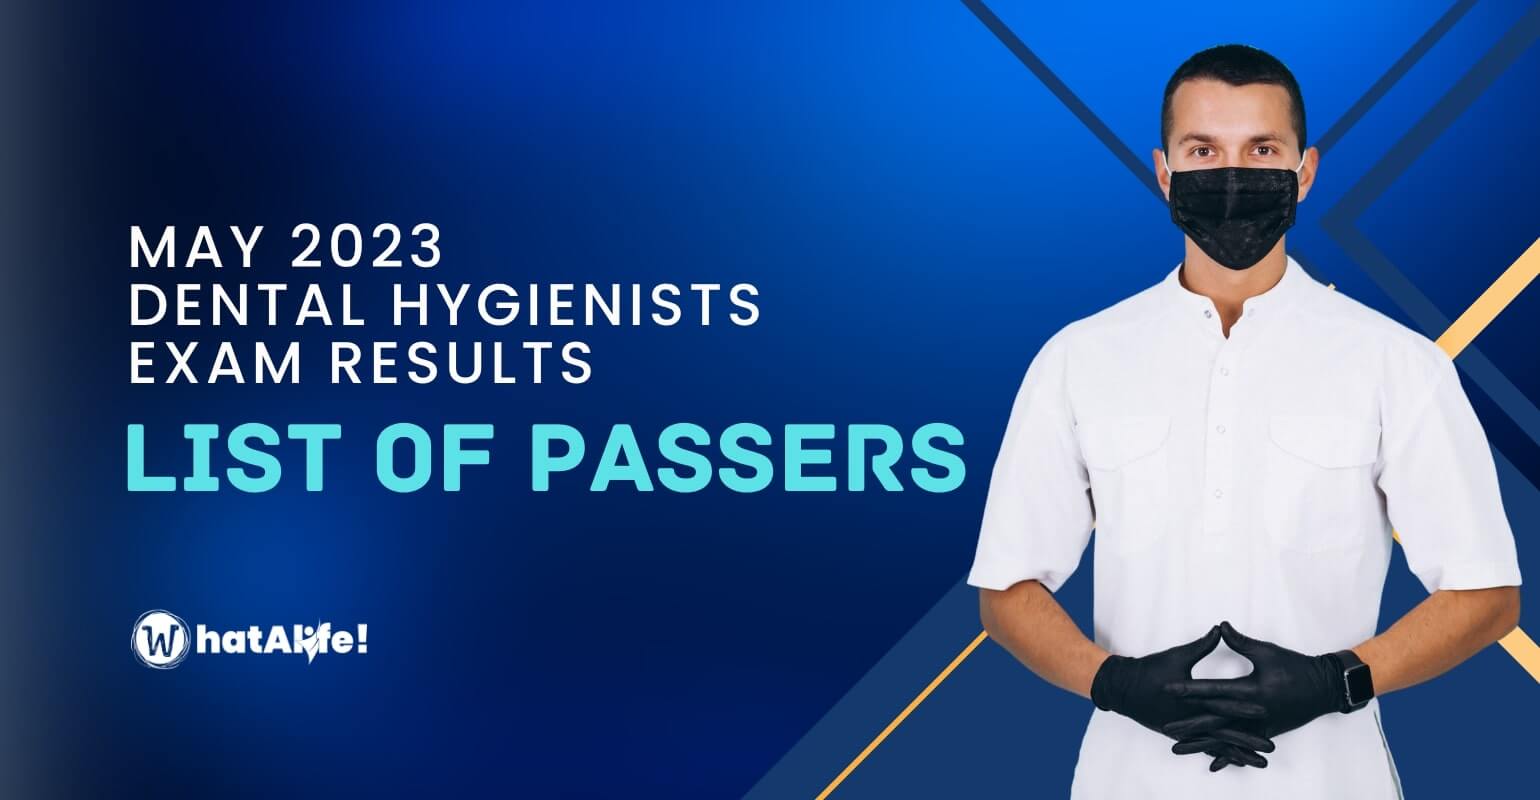 List of Passers – May 2023 Dental Hygienist Exam Results